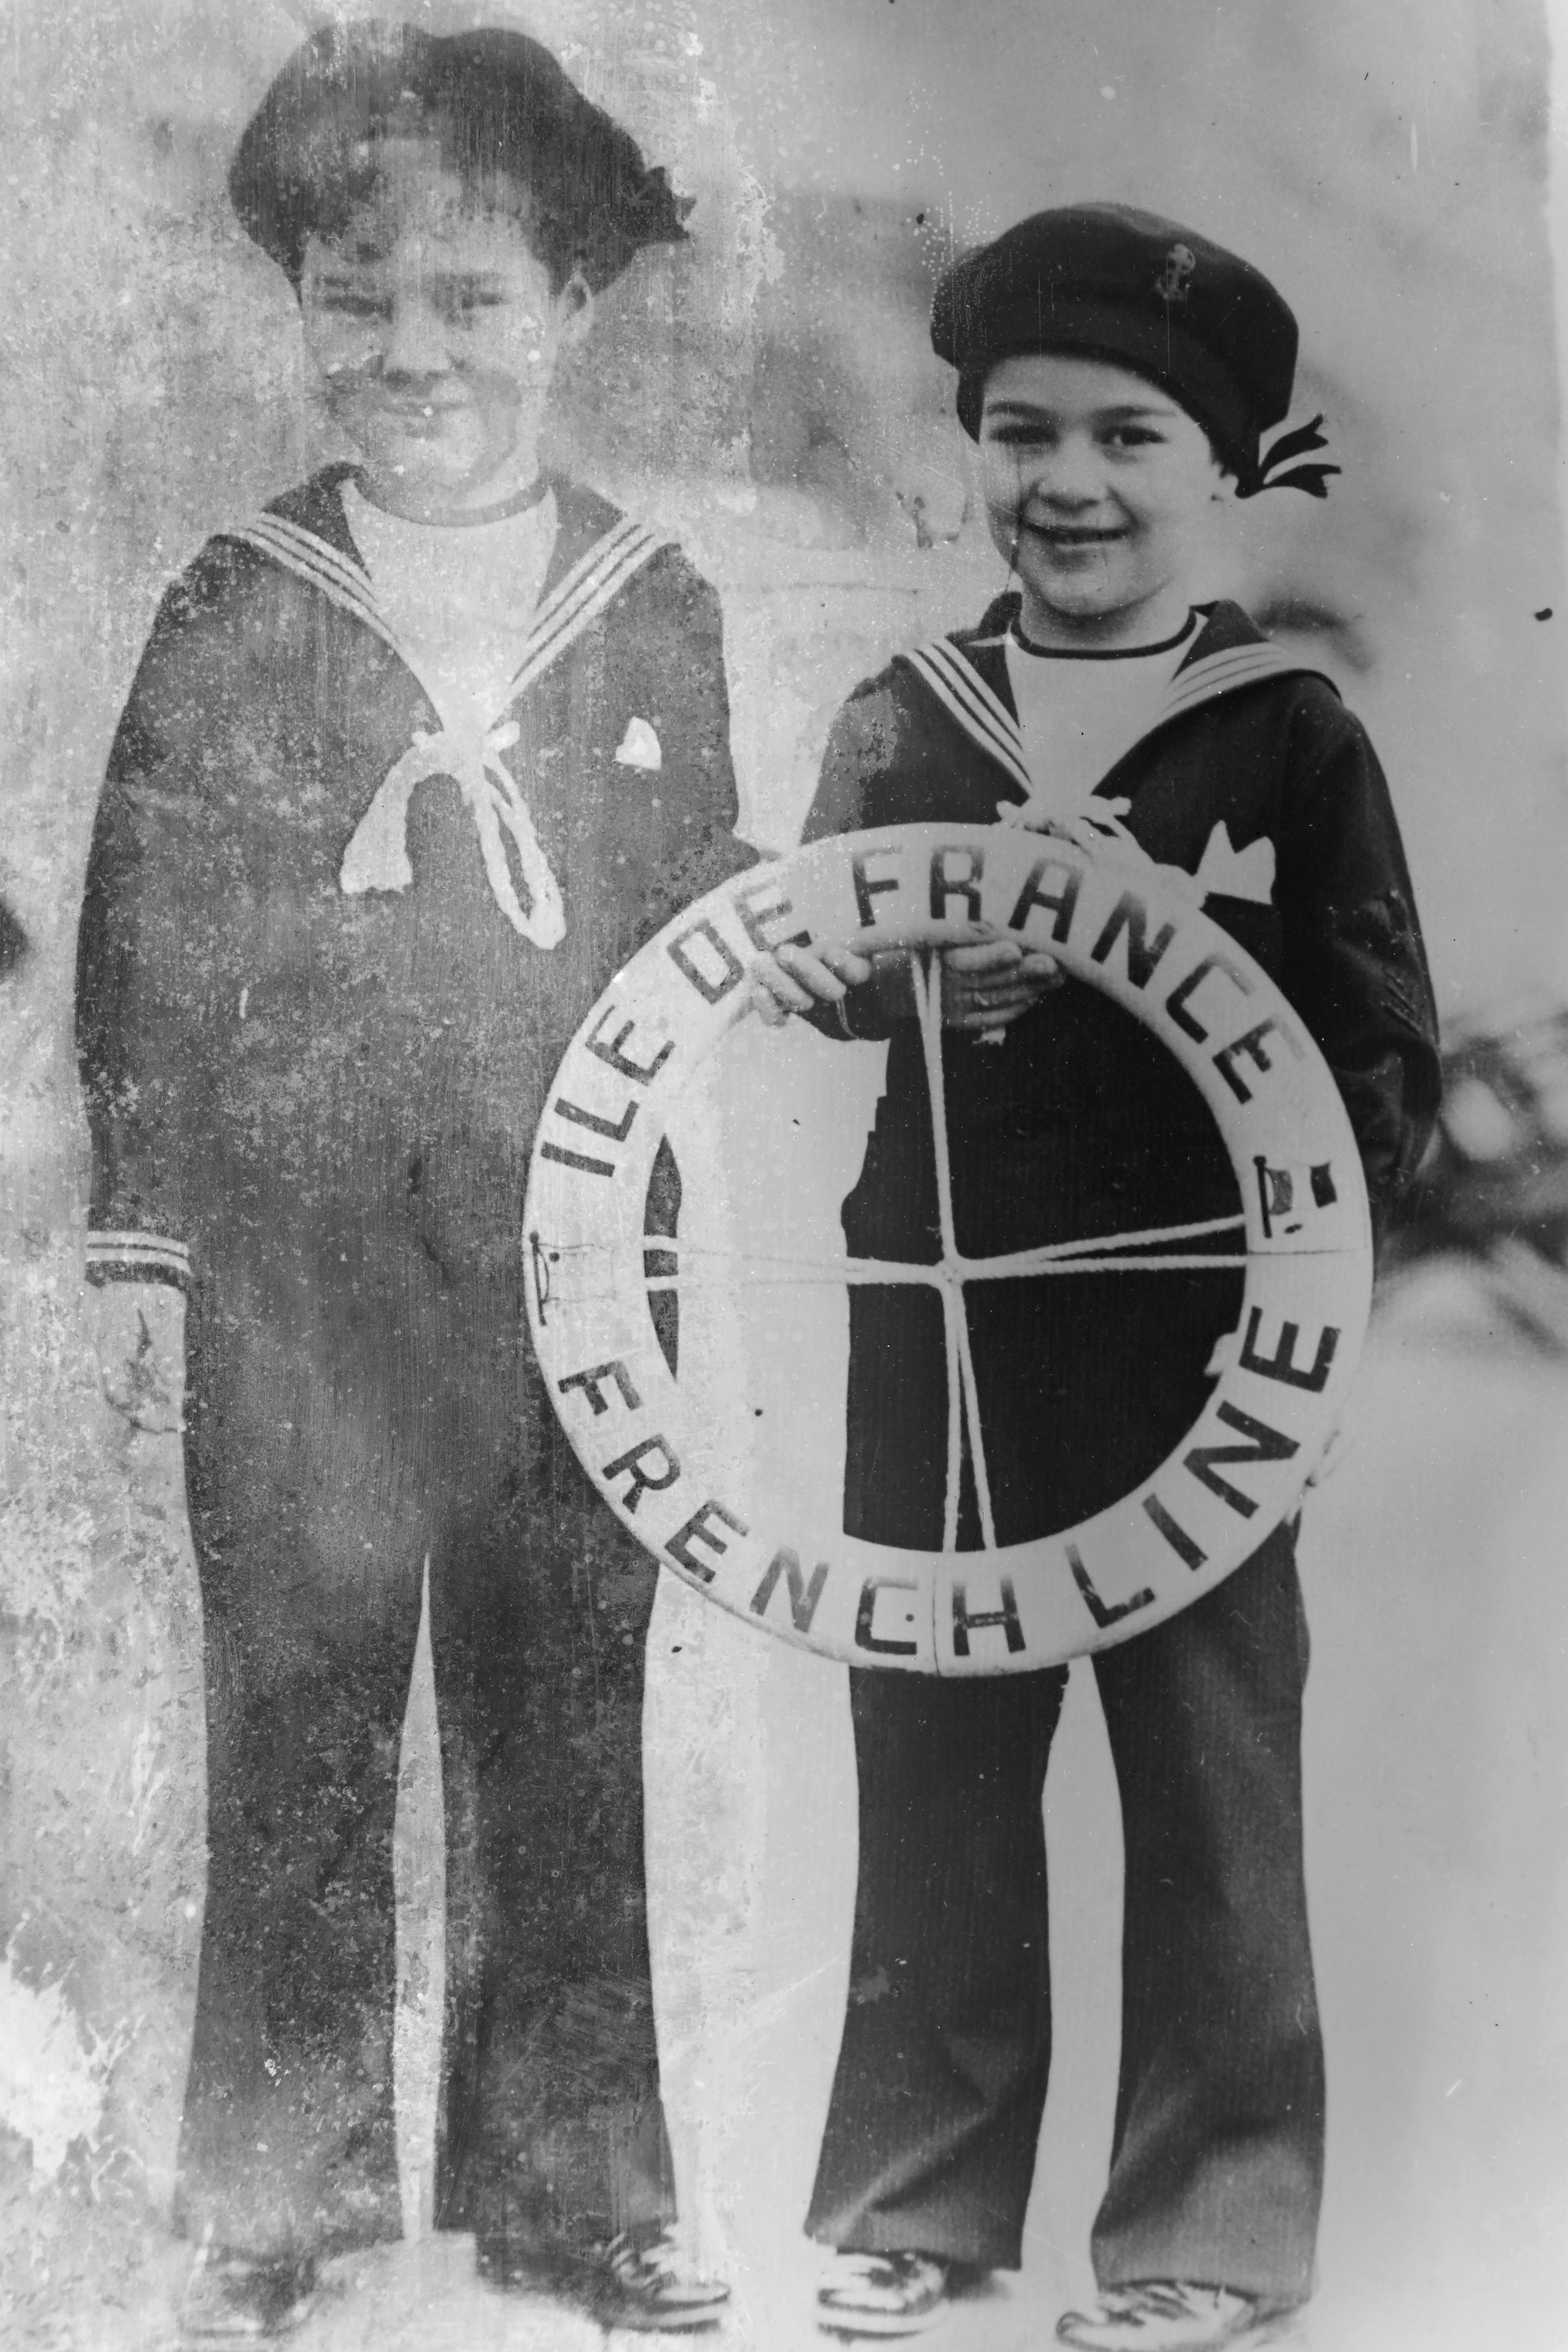 Sydney and Charles Chaplin Jr. were photographed aboard the ship "Ile de France" before their arrival at Le Havre on November 3, 1931 | Source: Getty Images